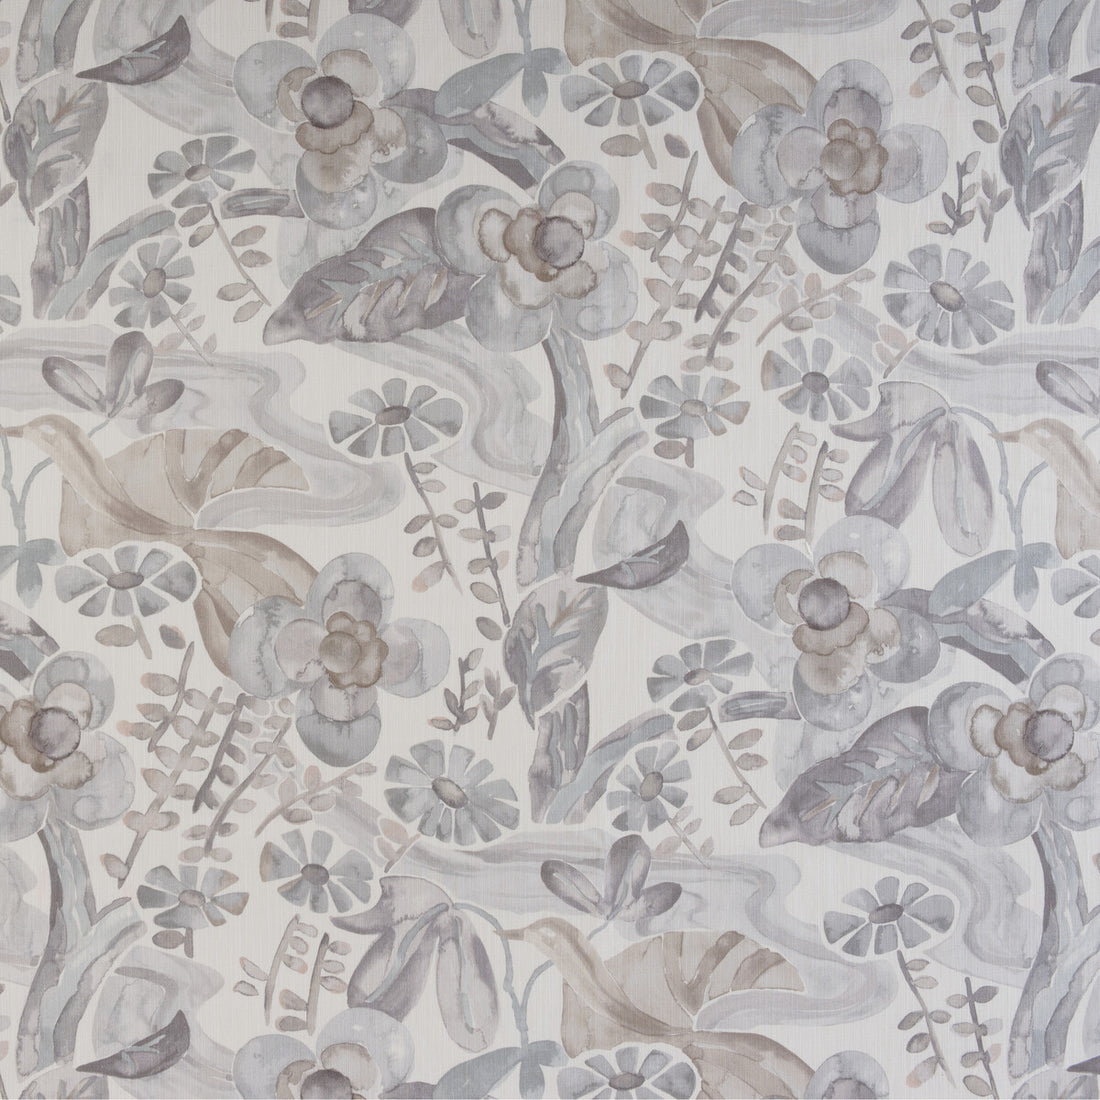 Faerie fabric in feather color - pattern FAERIE.10.0 - by Kravet Design in the Barbara Barry Home Midsummer collection